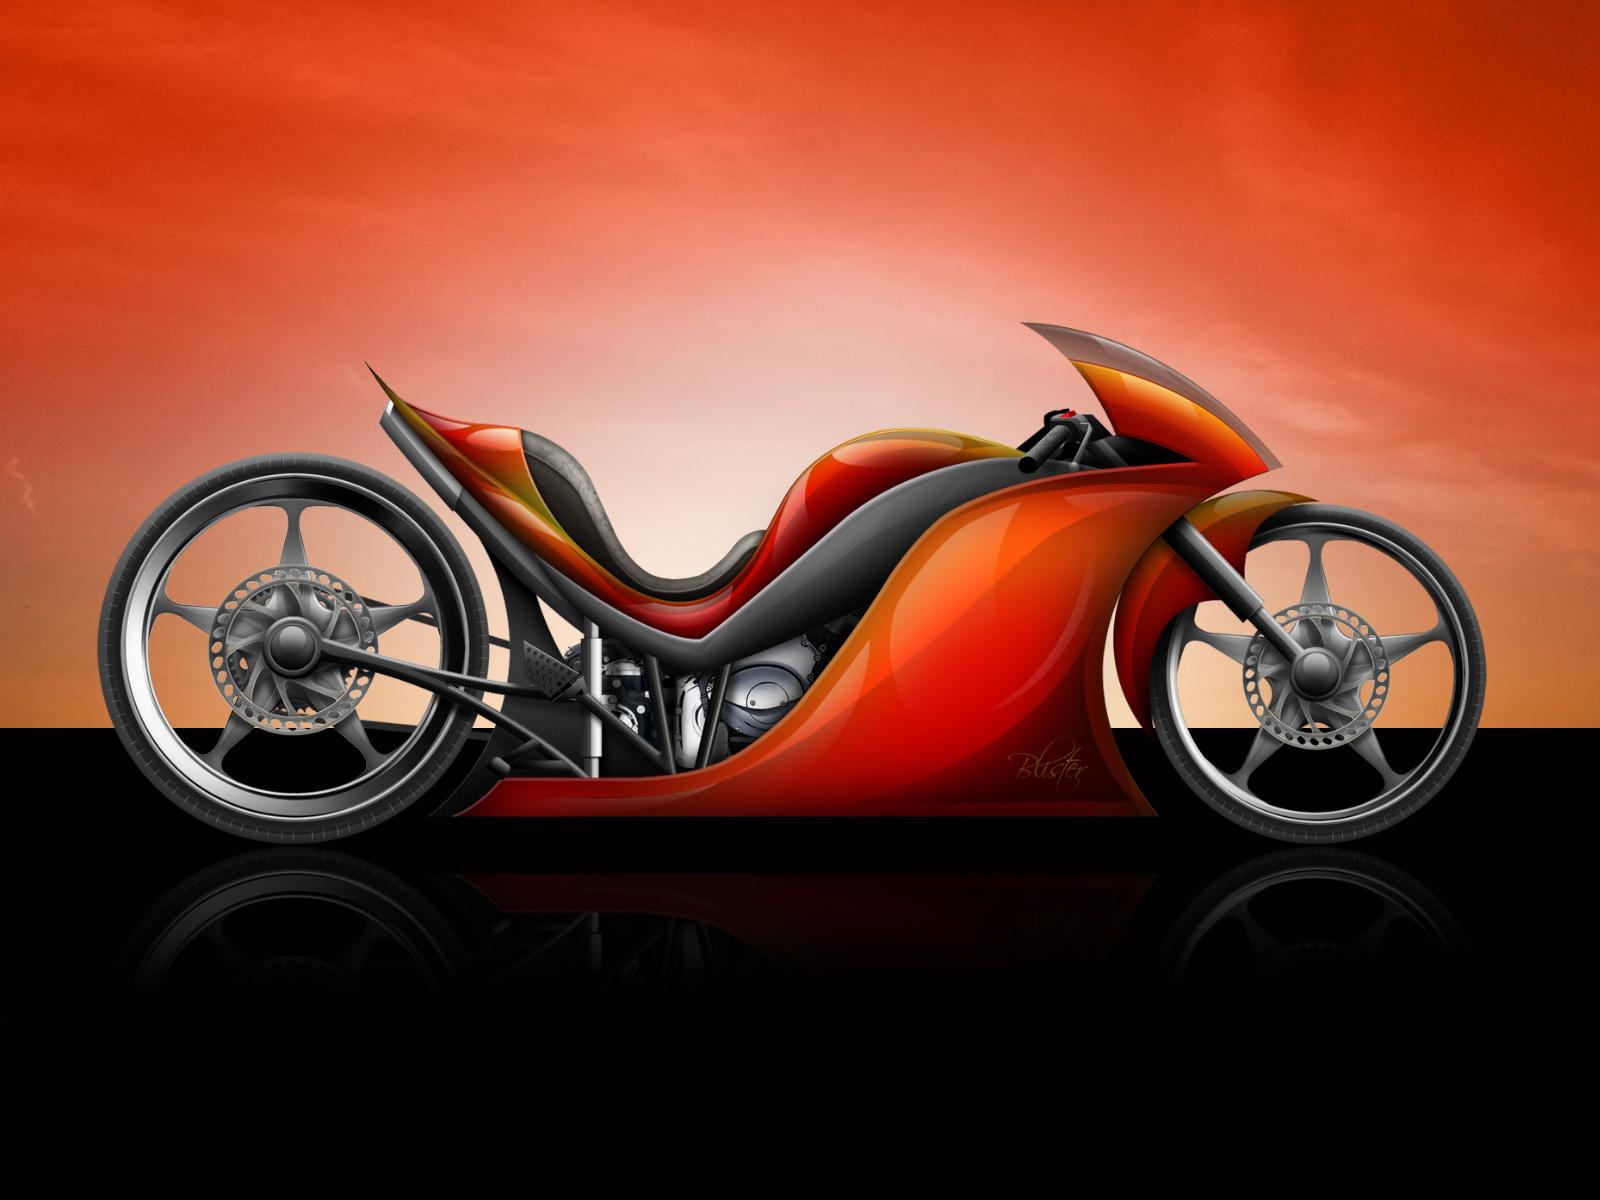 Red Motorcycle wallpaper and image, picture, photo